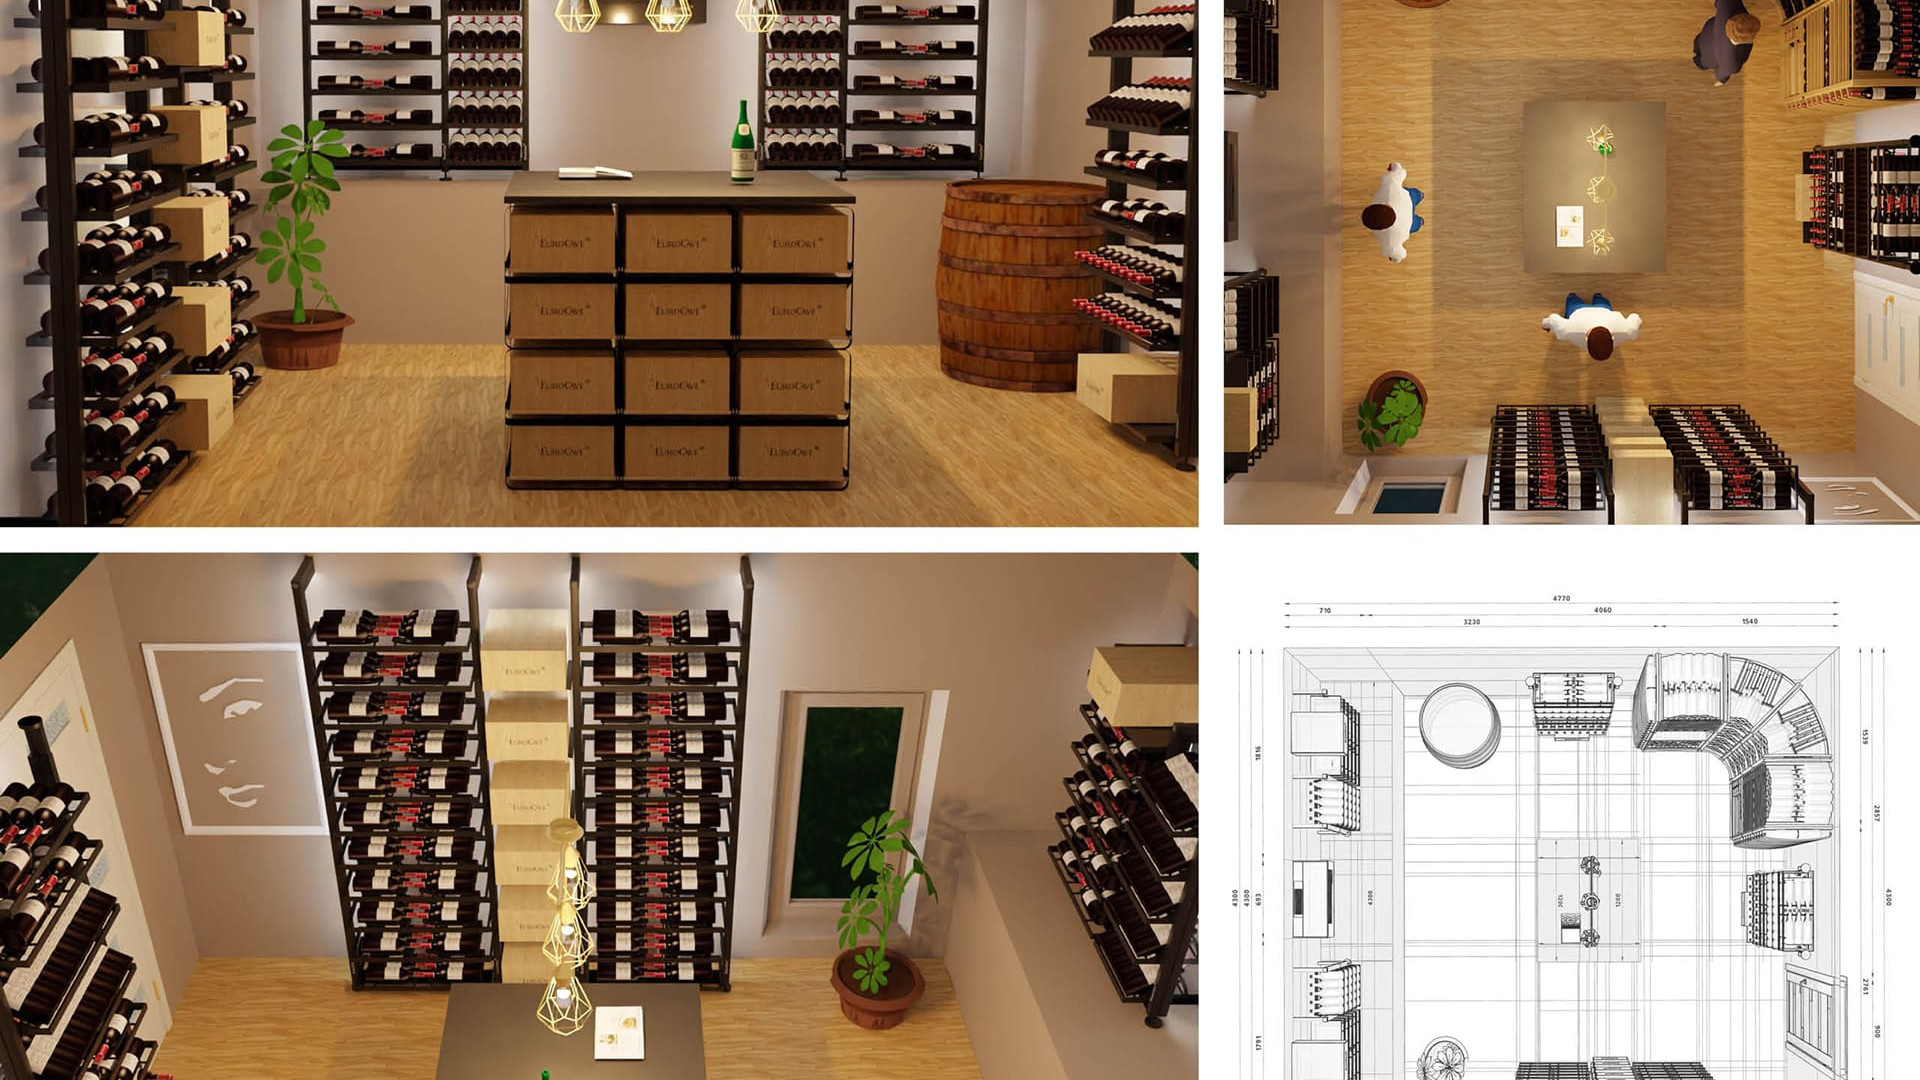 3D design with realistic rendering of a tailor-made wine cellar project and configuration of wine storage unit options. Cellar design.